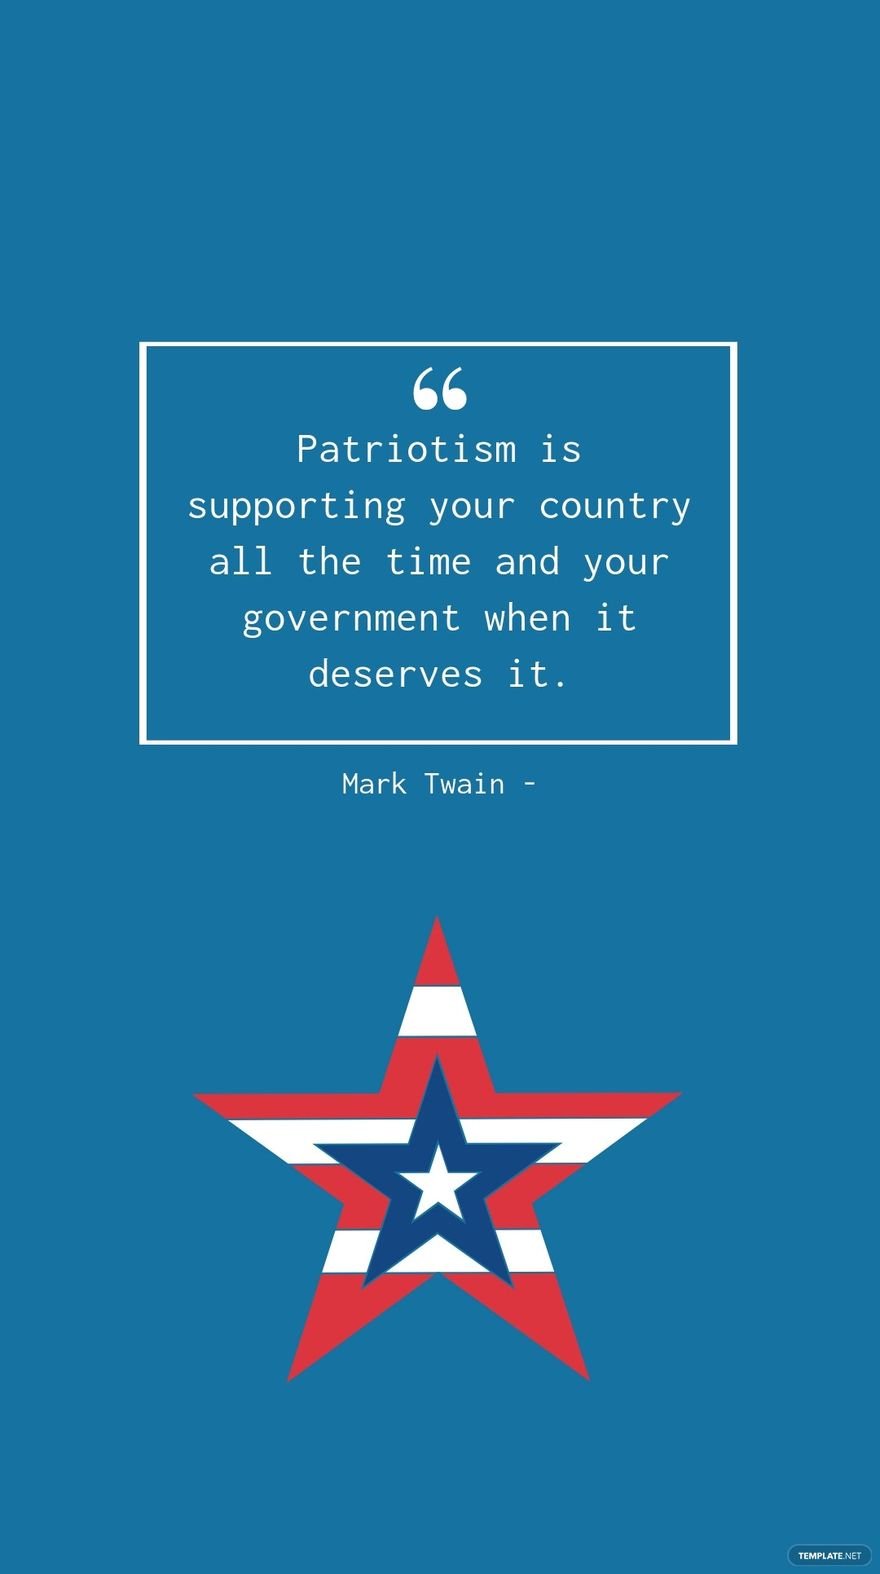 Mark Twain - Patriotism is supporting your country all the time and your government when it deserves it.